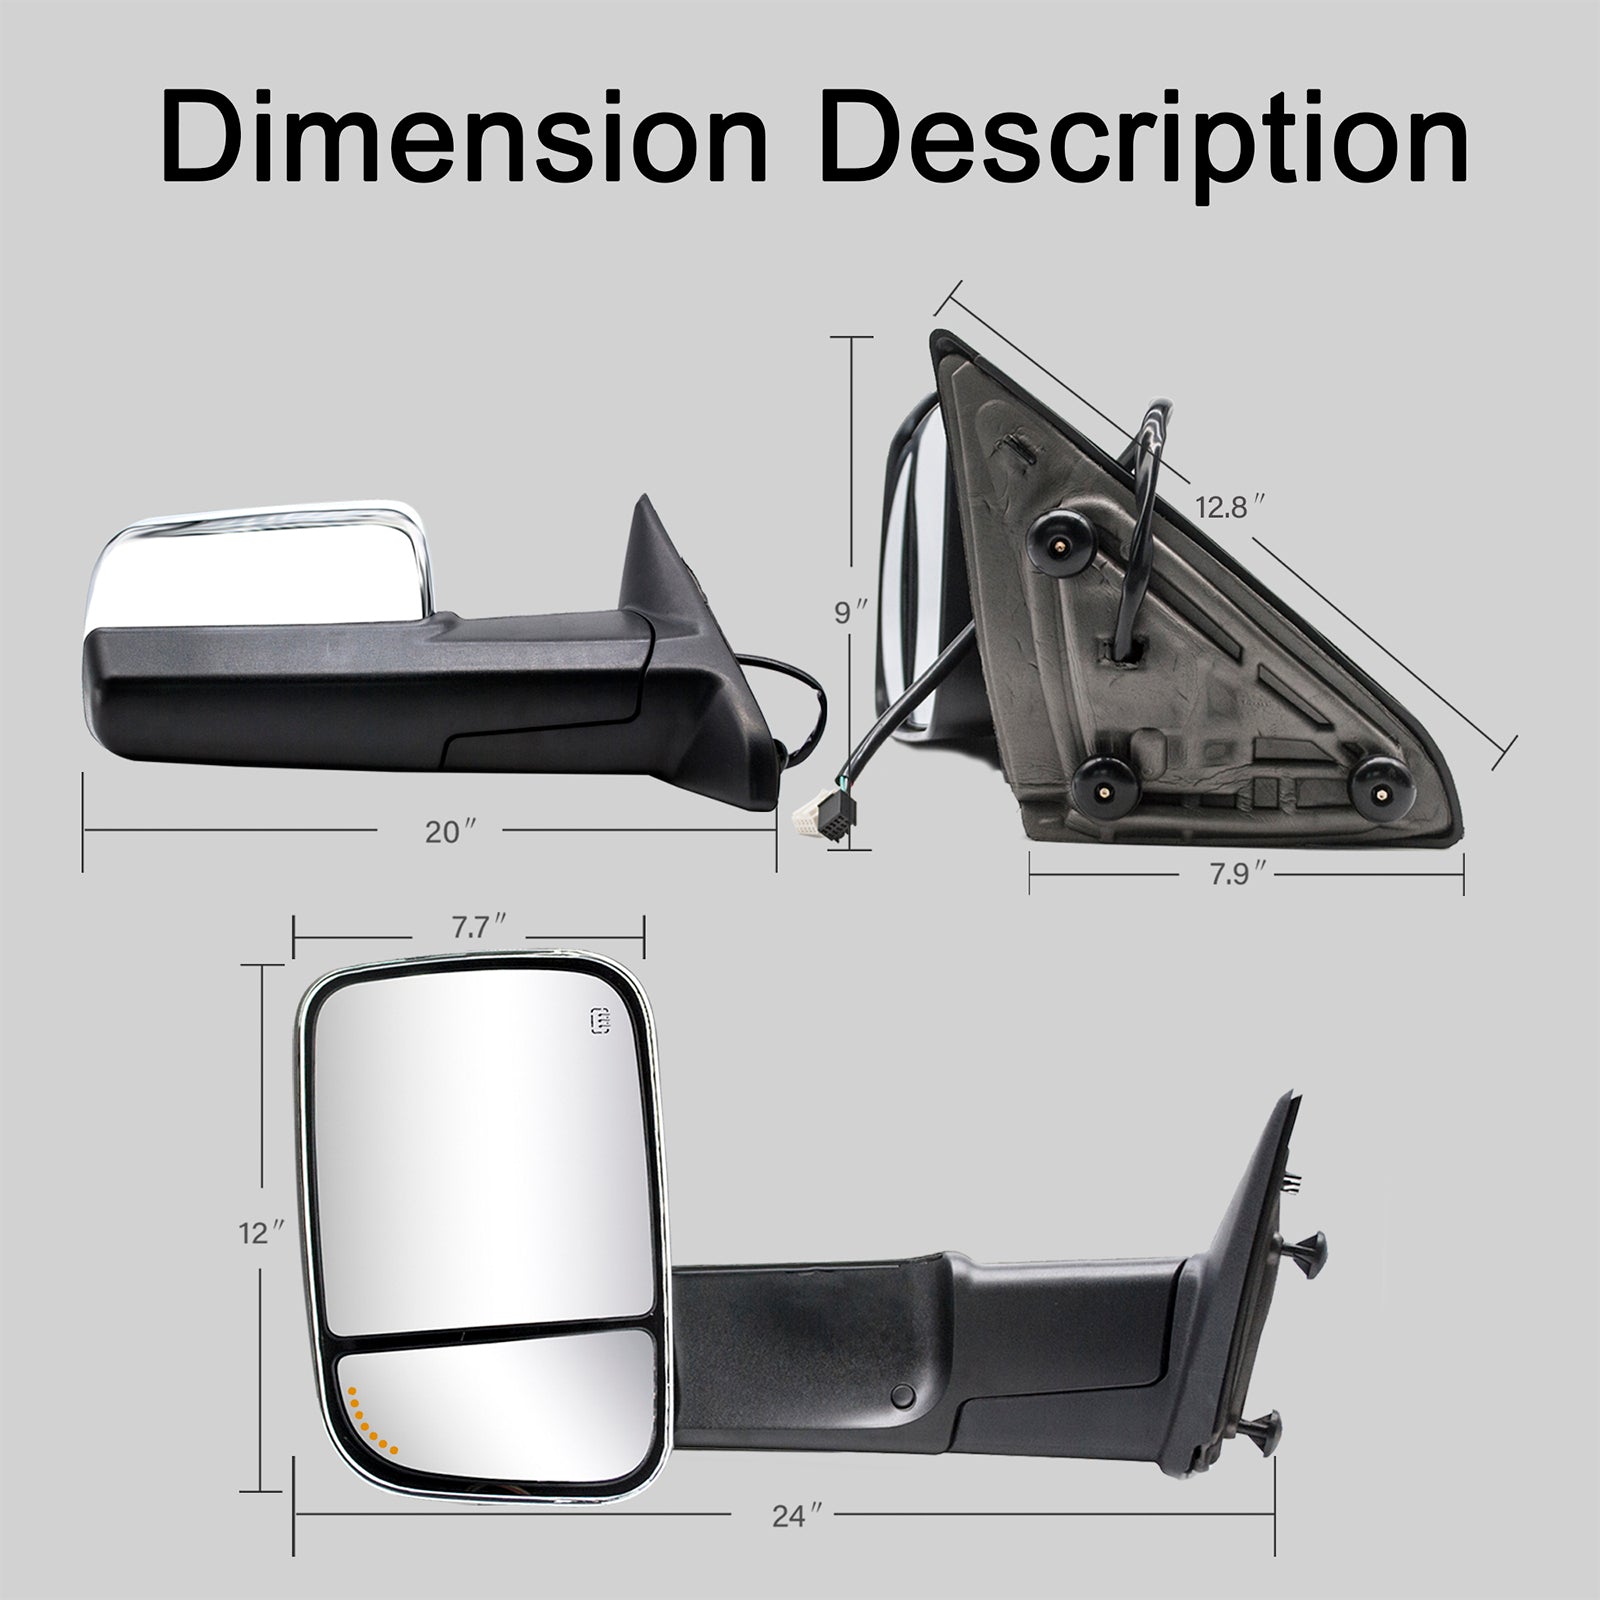 Towing Mirrors for 2009-2018 Dodge Ram 1500 2500 3500 Power Heated Puddle Light, Arrow Signal On Glass, Chrome Cap 6C